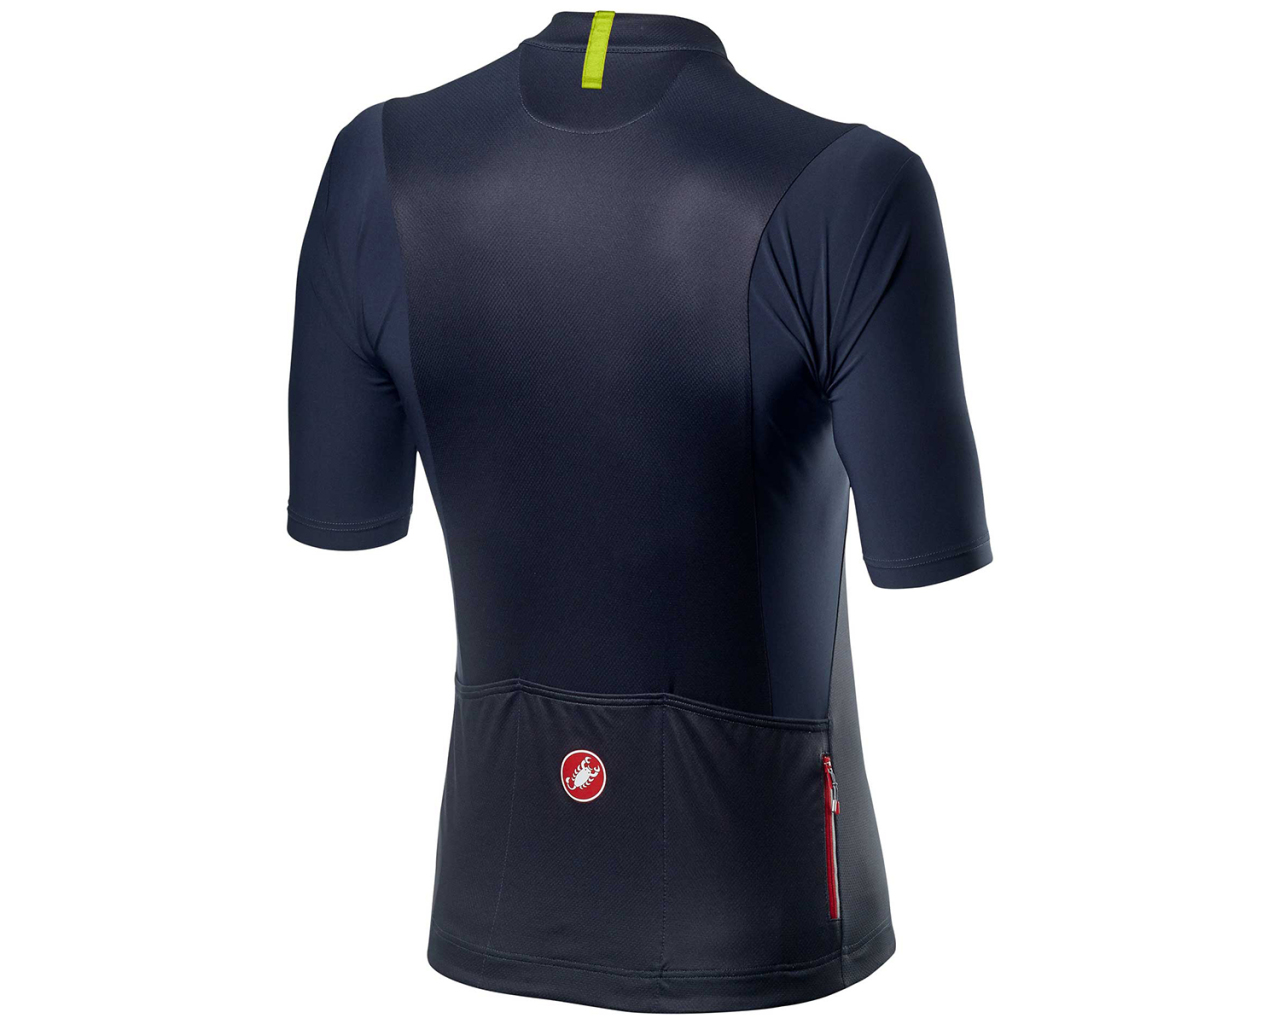 Castelli Unlimited Short Sleeve Cycling Jersey - SS20 | Merlin Cycles